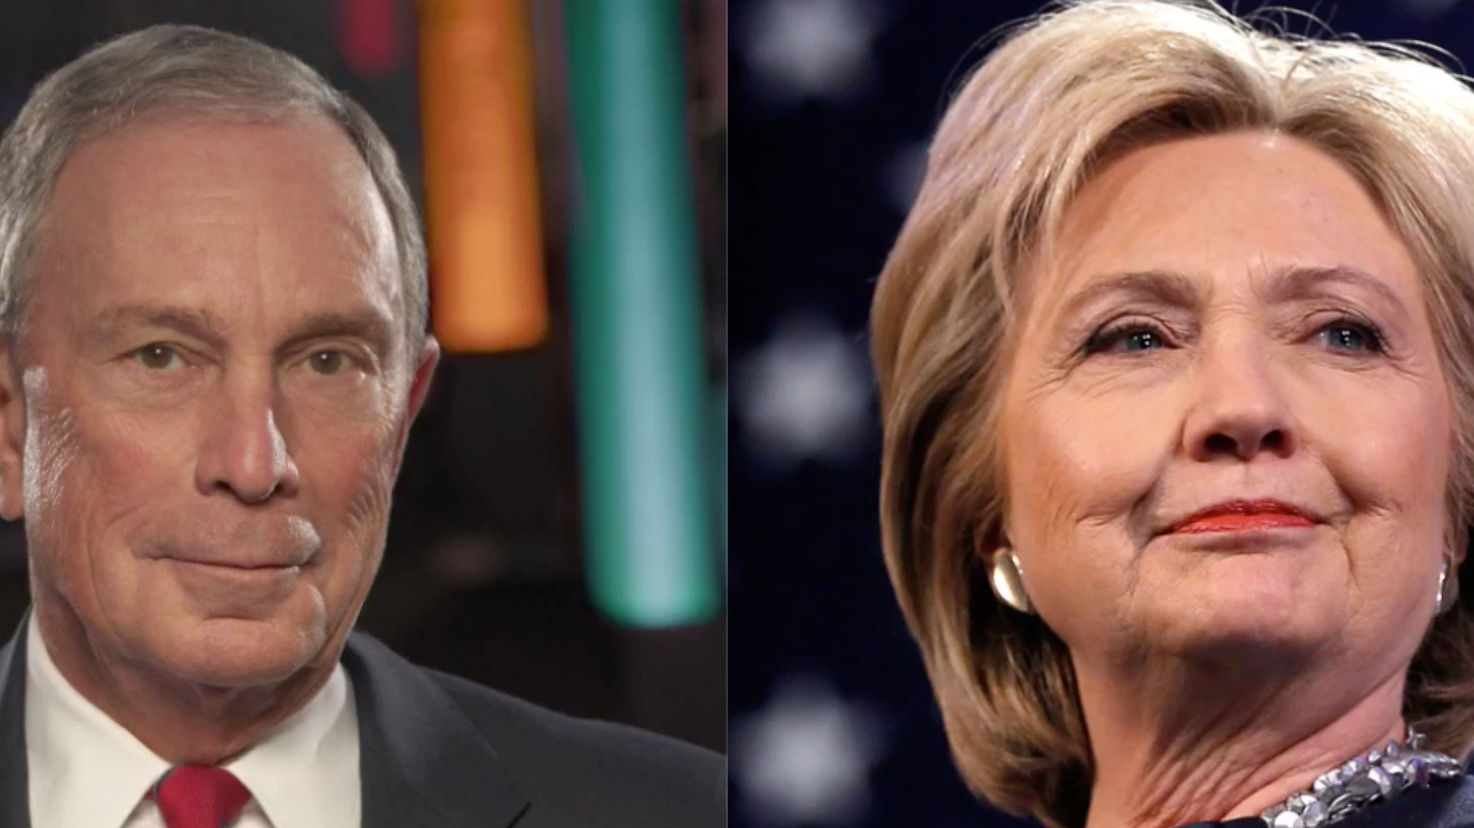 Over President's Day holiday weekend, the political rumor mills were running wild for Democratic Presidential hopeful, Mike Bloomberg that Hillary Clinton would join him as his running mate